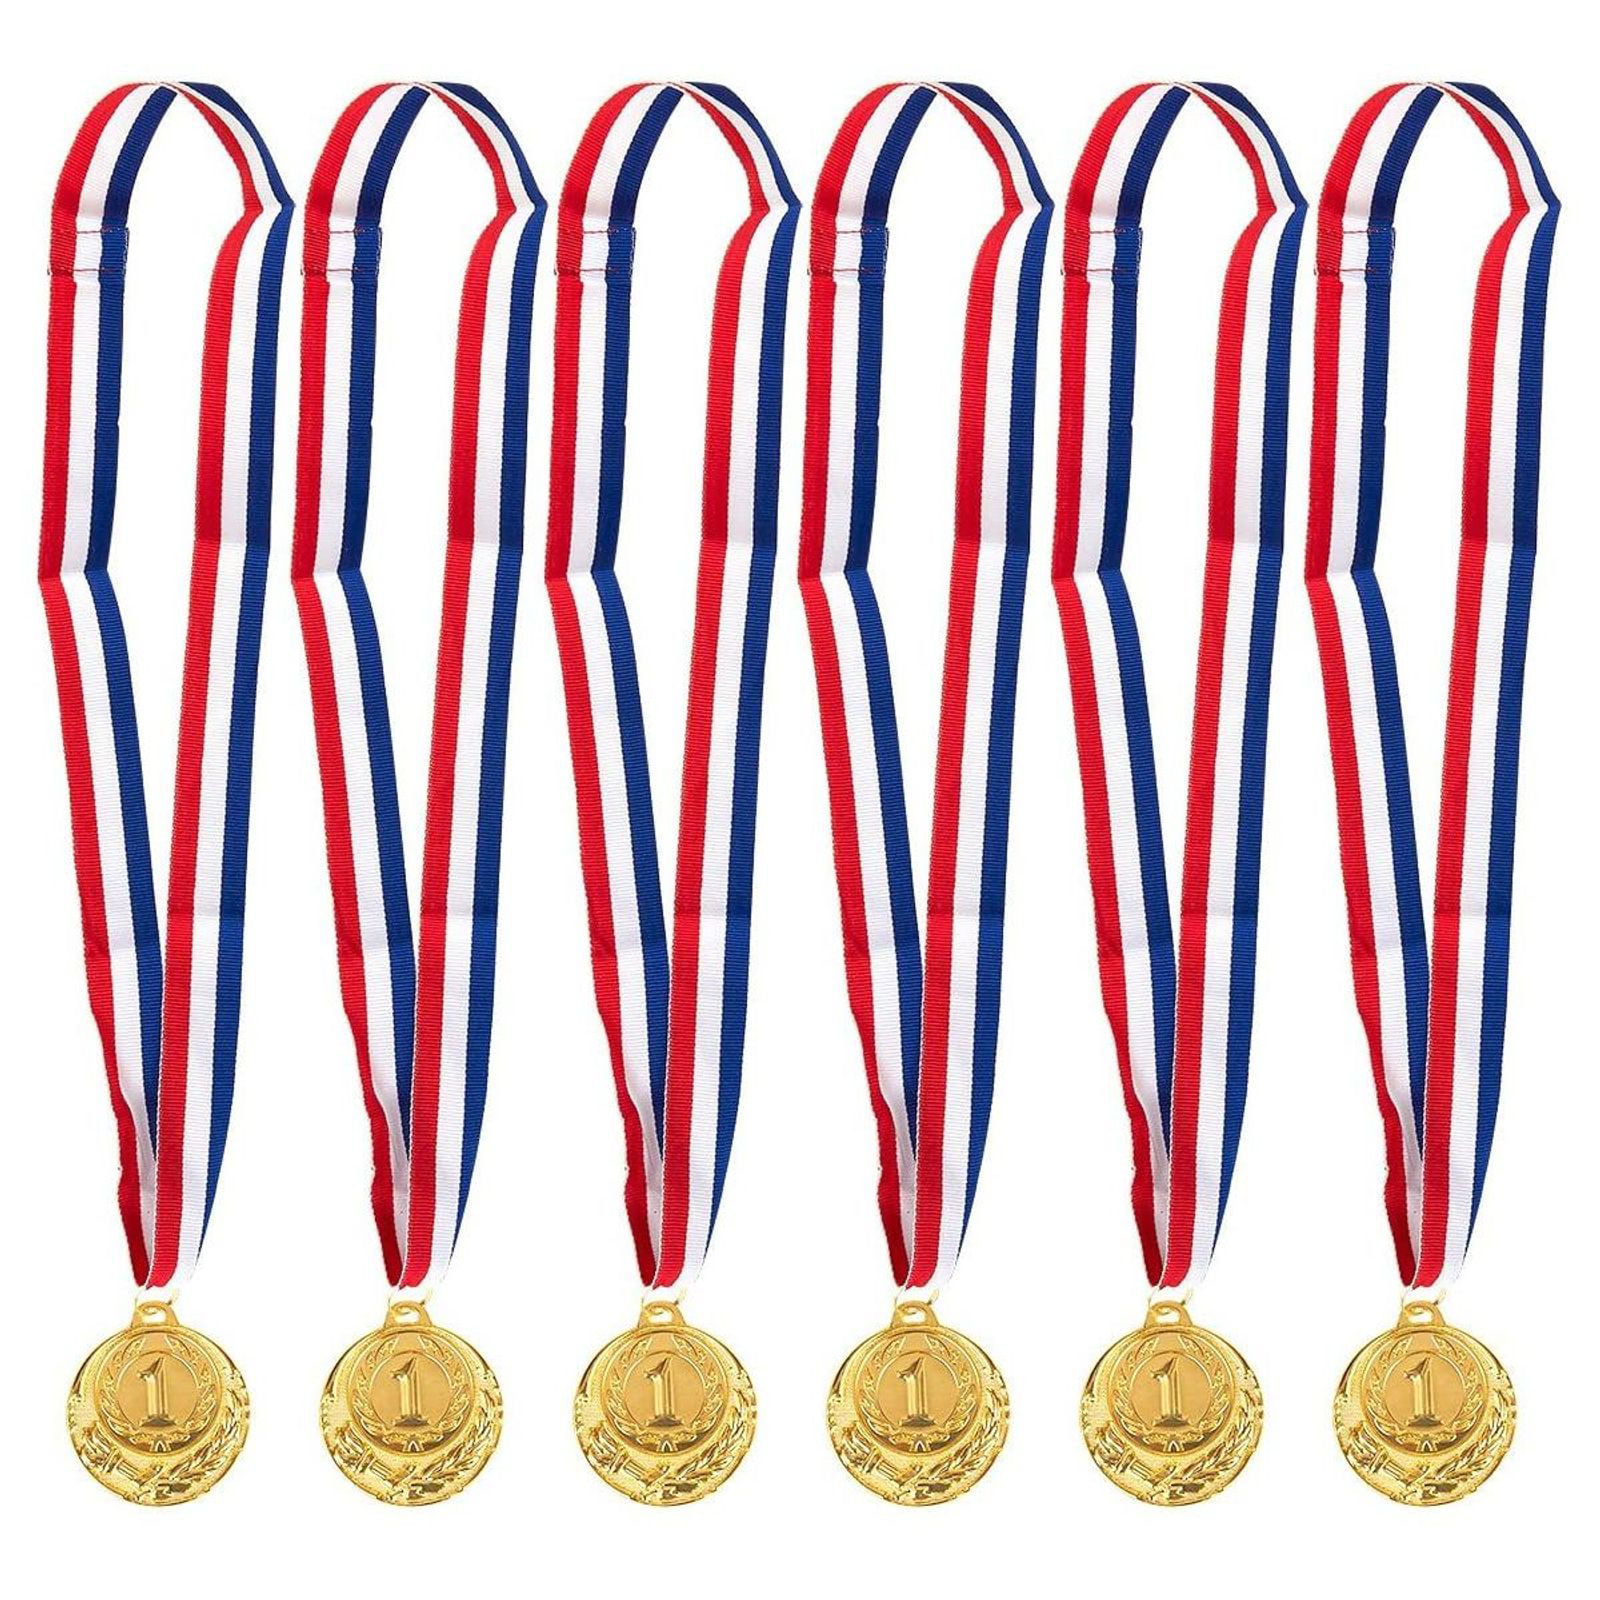 Bronze Book and Lamp Scholastic Medals Trophy Champion Participant Award Prize with Neck Ribbons Pack of 10